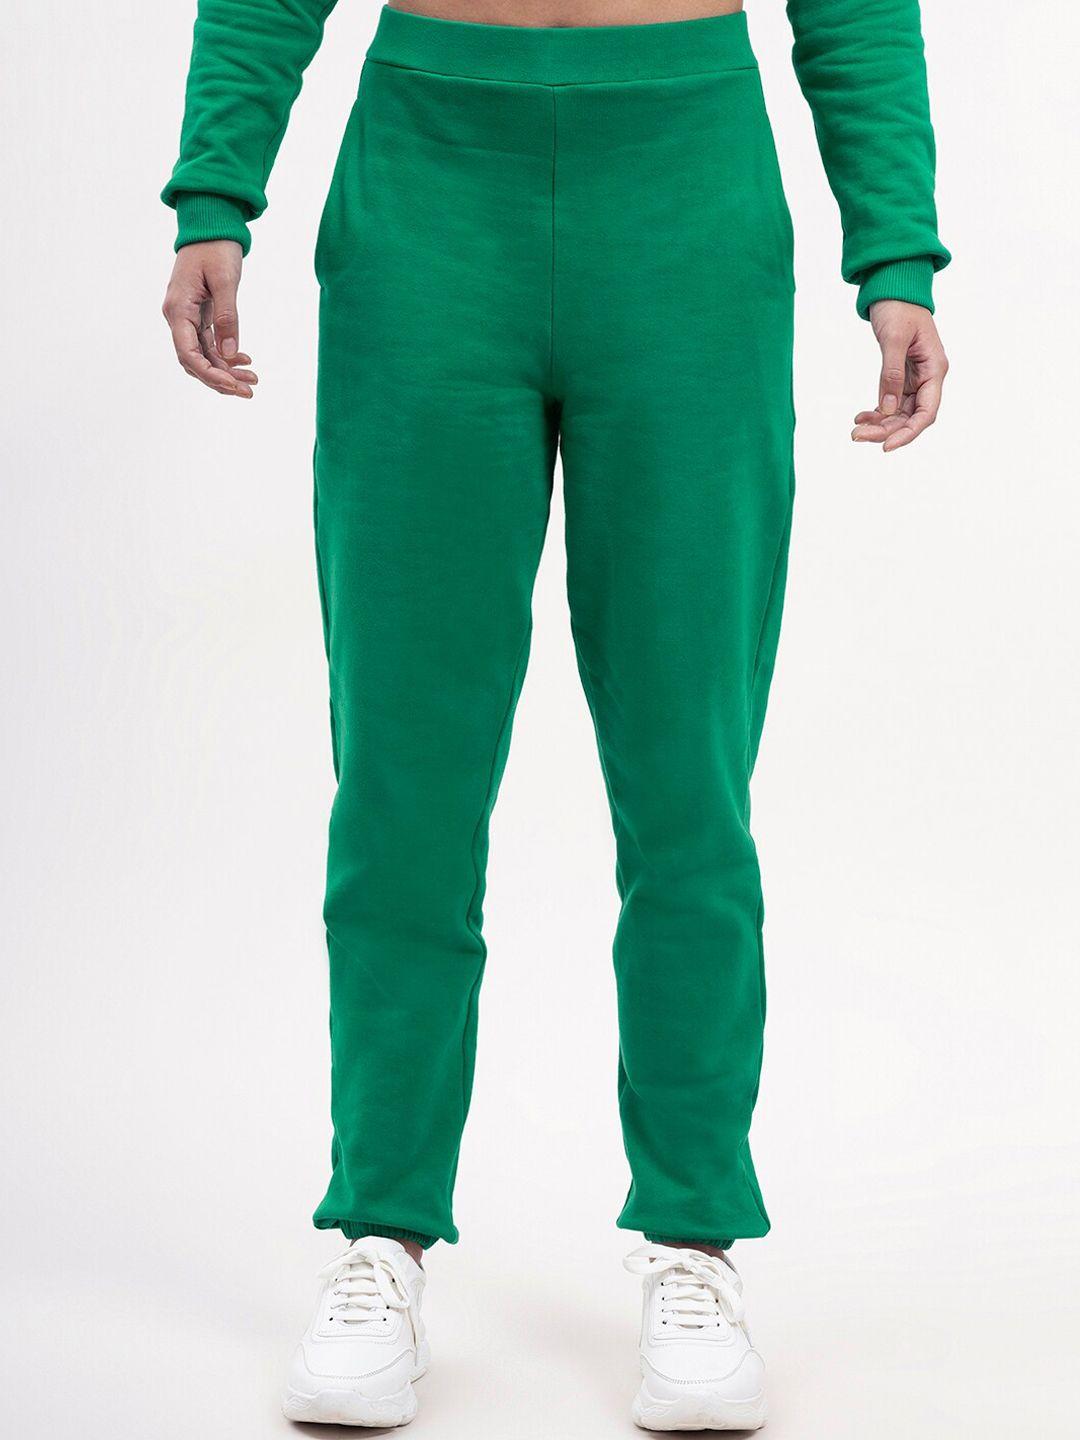 fablestreet-women-green-solid-cotton-relaxed-fit-joggers